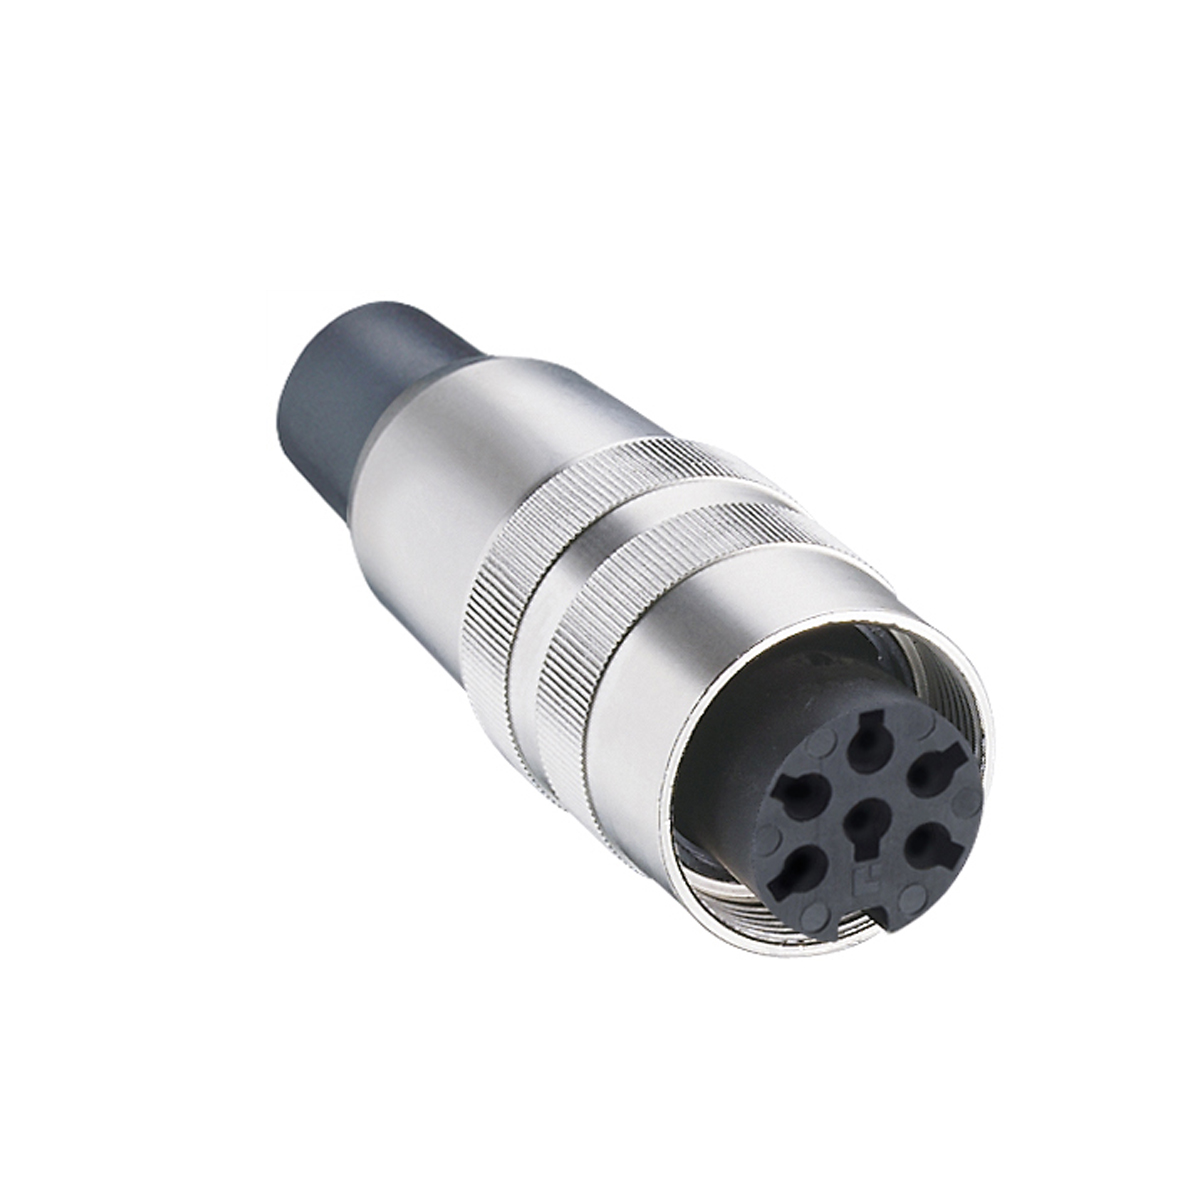 Lumberg: KV ...-8 C (Series 03 | Circular connectors with threaded joint M16 acc. to IEC 61076-2-106, IP40/IP68)